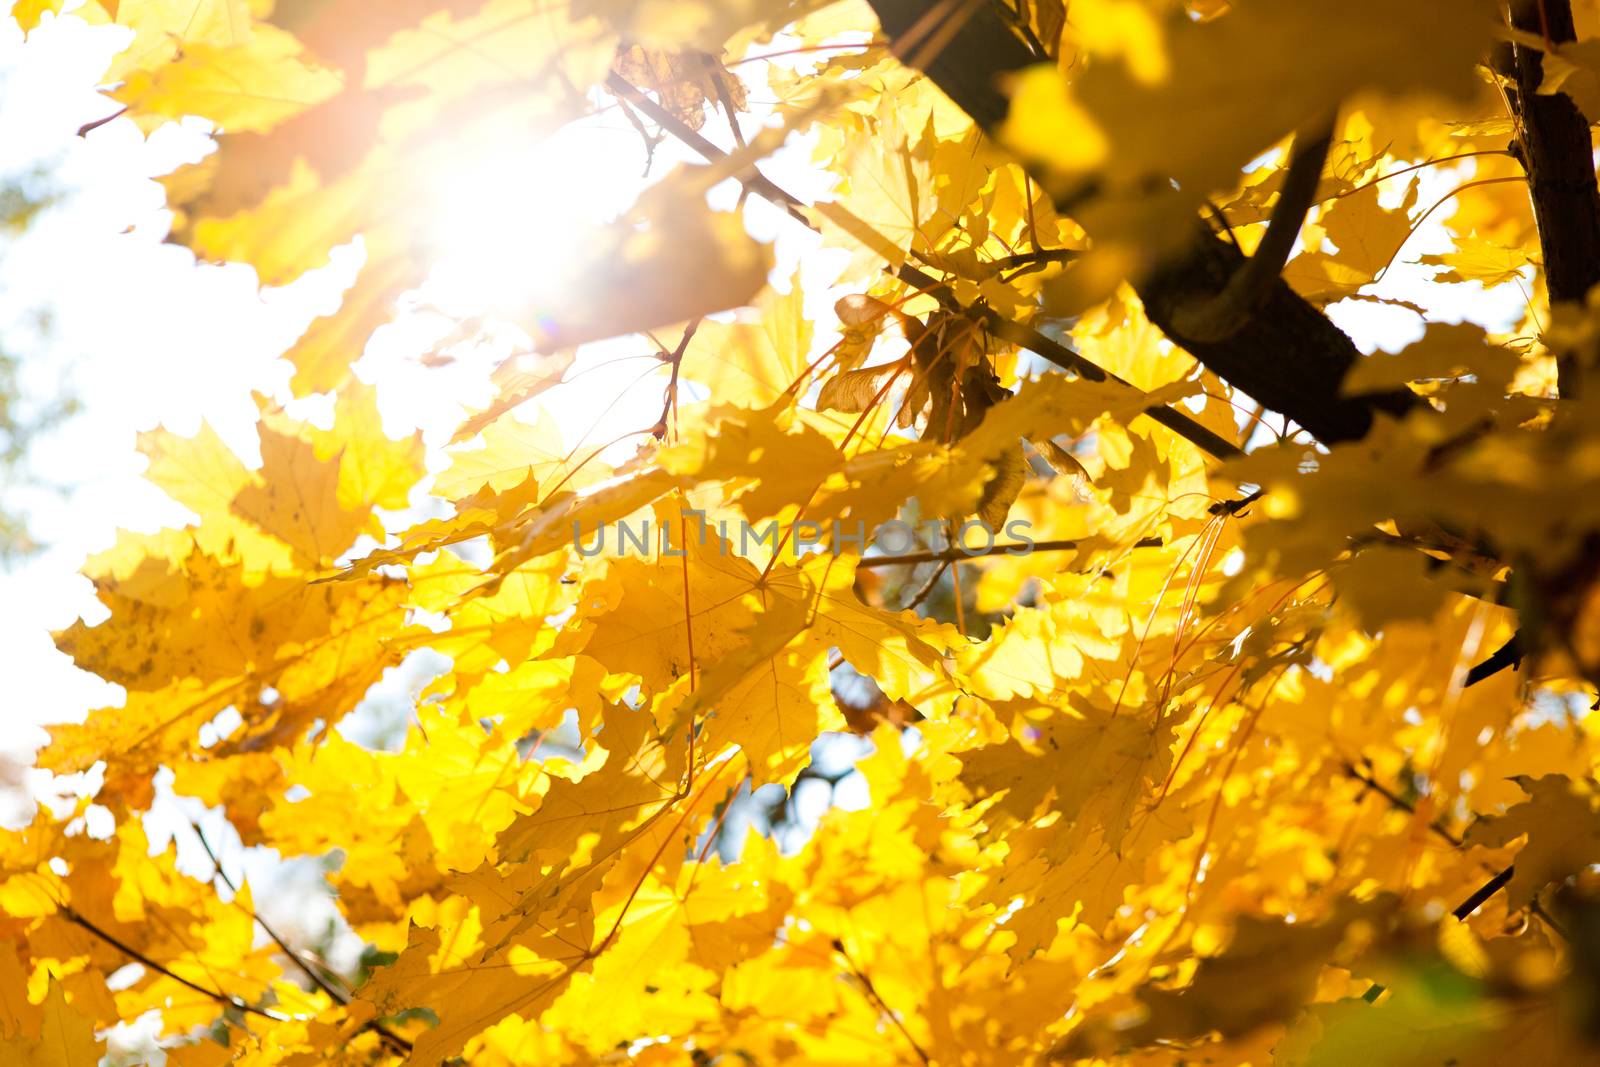 sun and autumn leaves by vsurkov